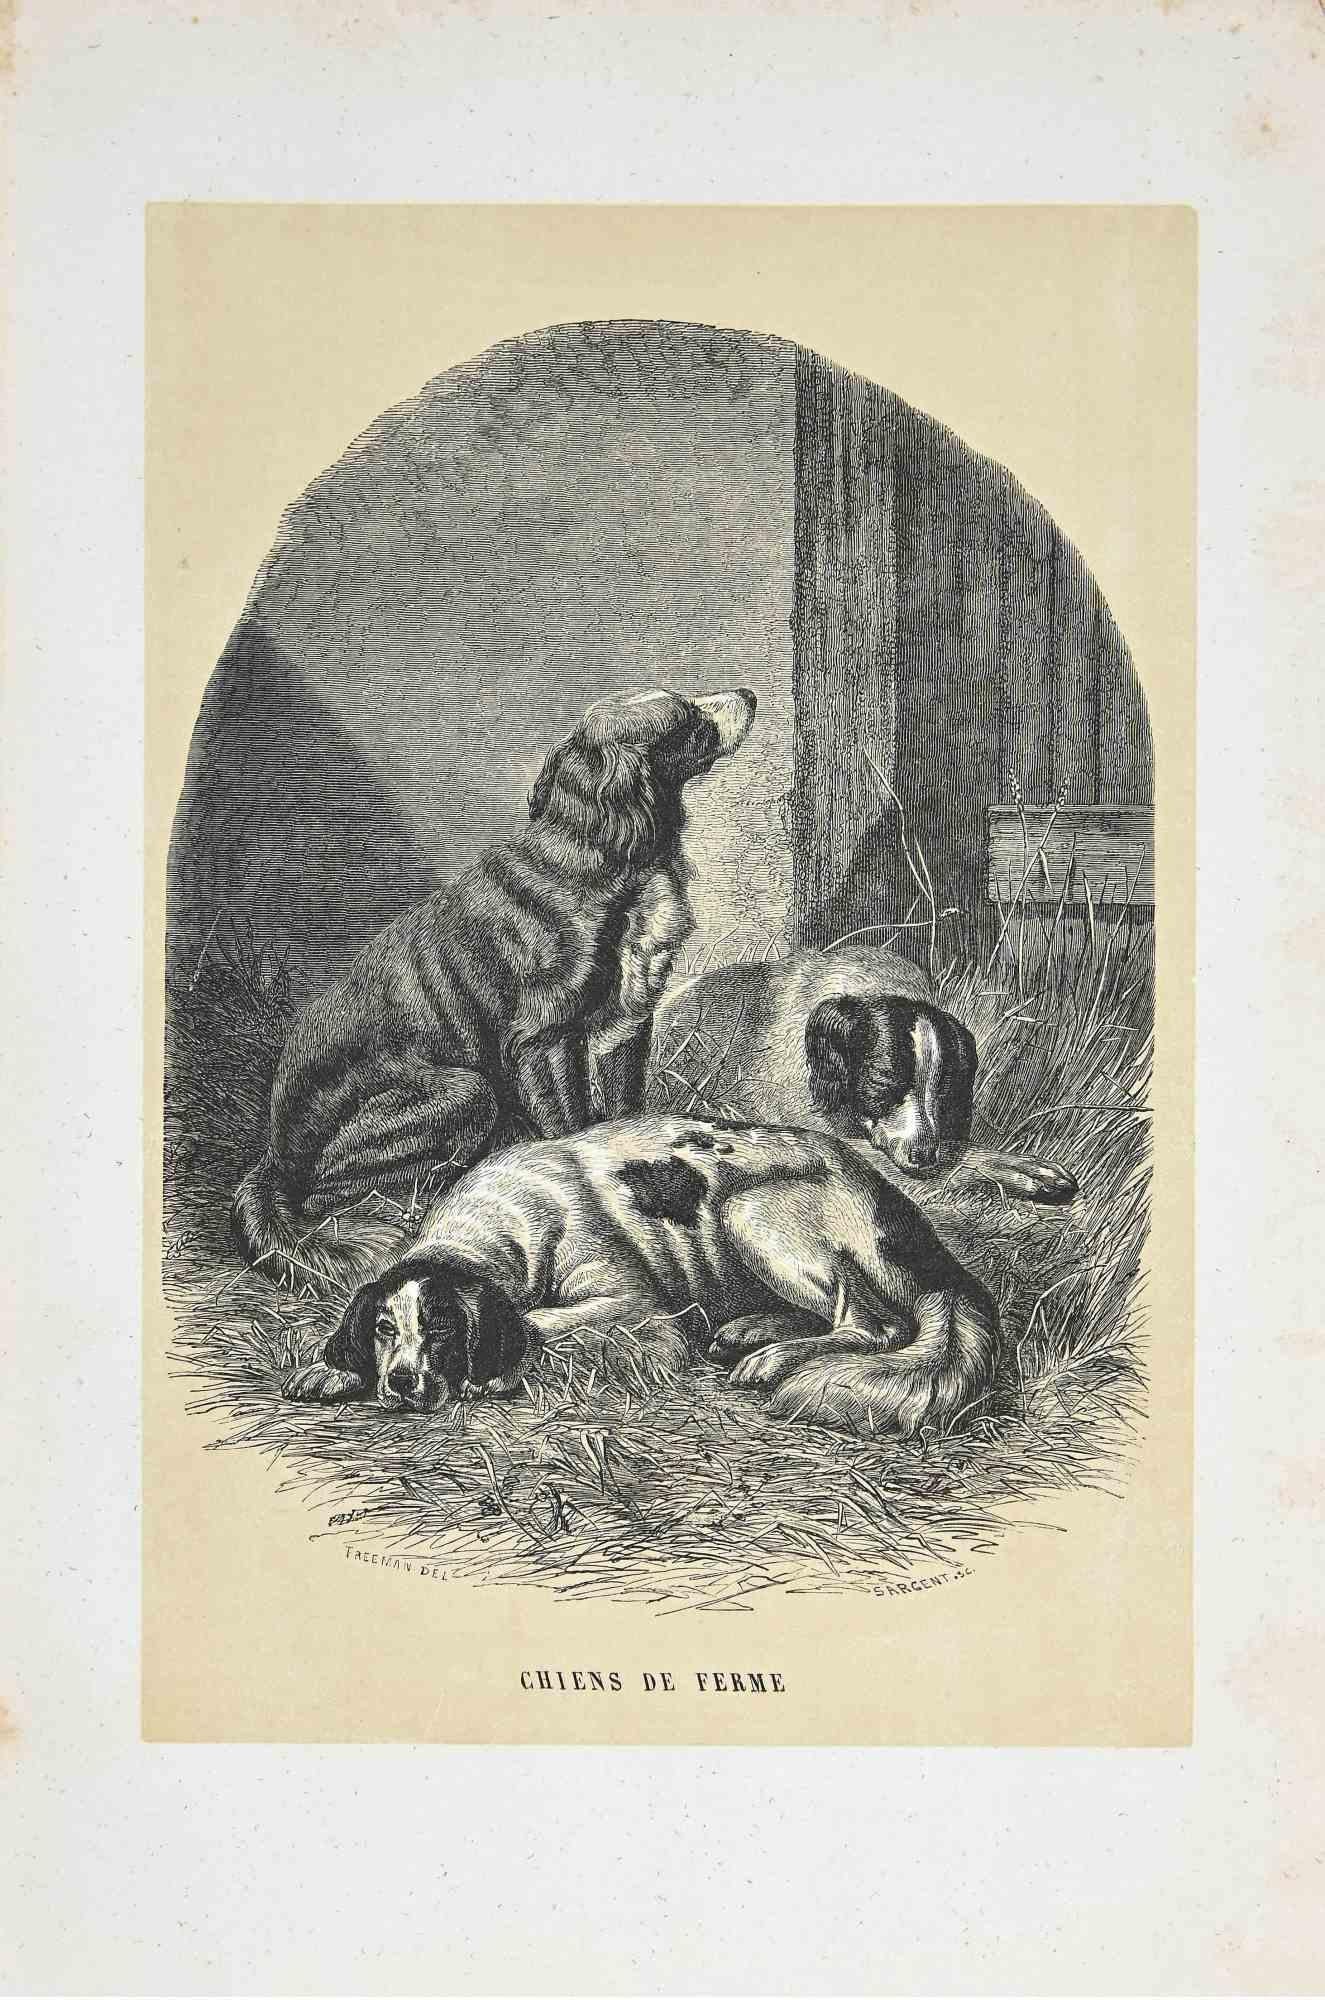 Farm Dogs is an original lithograph on ivory-colored paper, realized by Paul Gervais (1816-1879). The artwork is from The Series of "Les Trois Règnes de la Nature", and was published in 1854.

Good conditions with minor foxing on the frame.

Titled